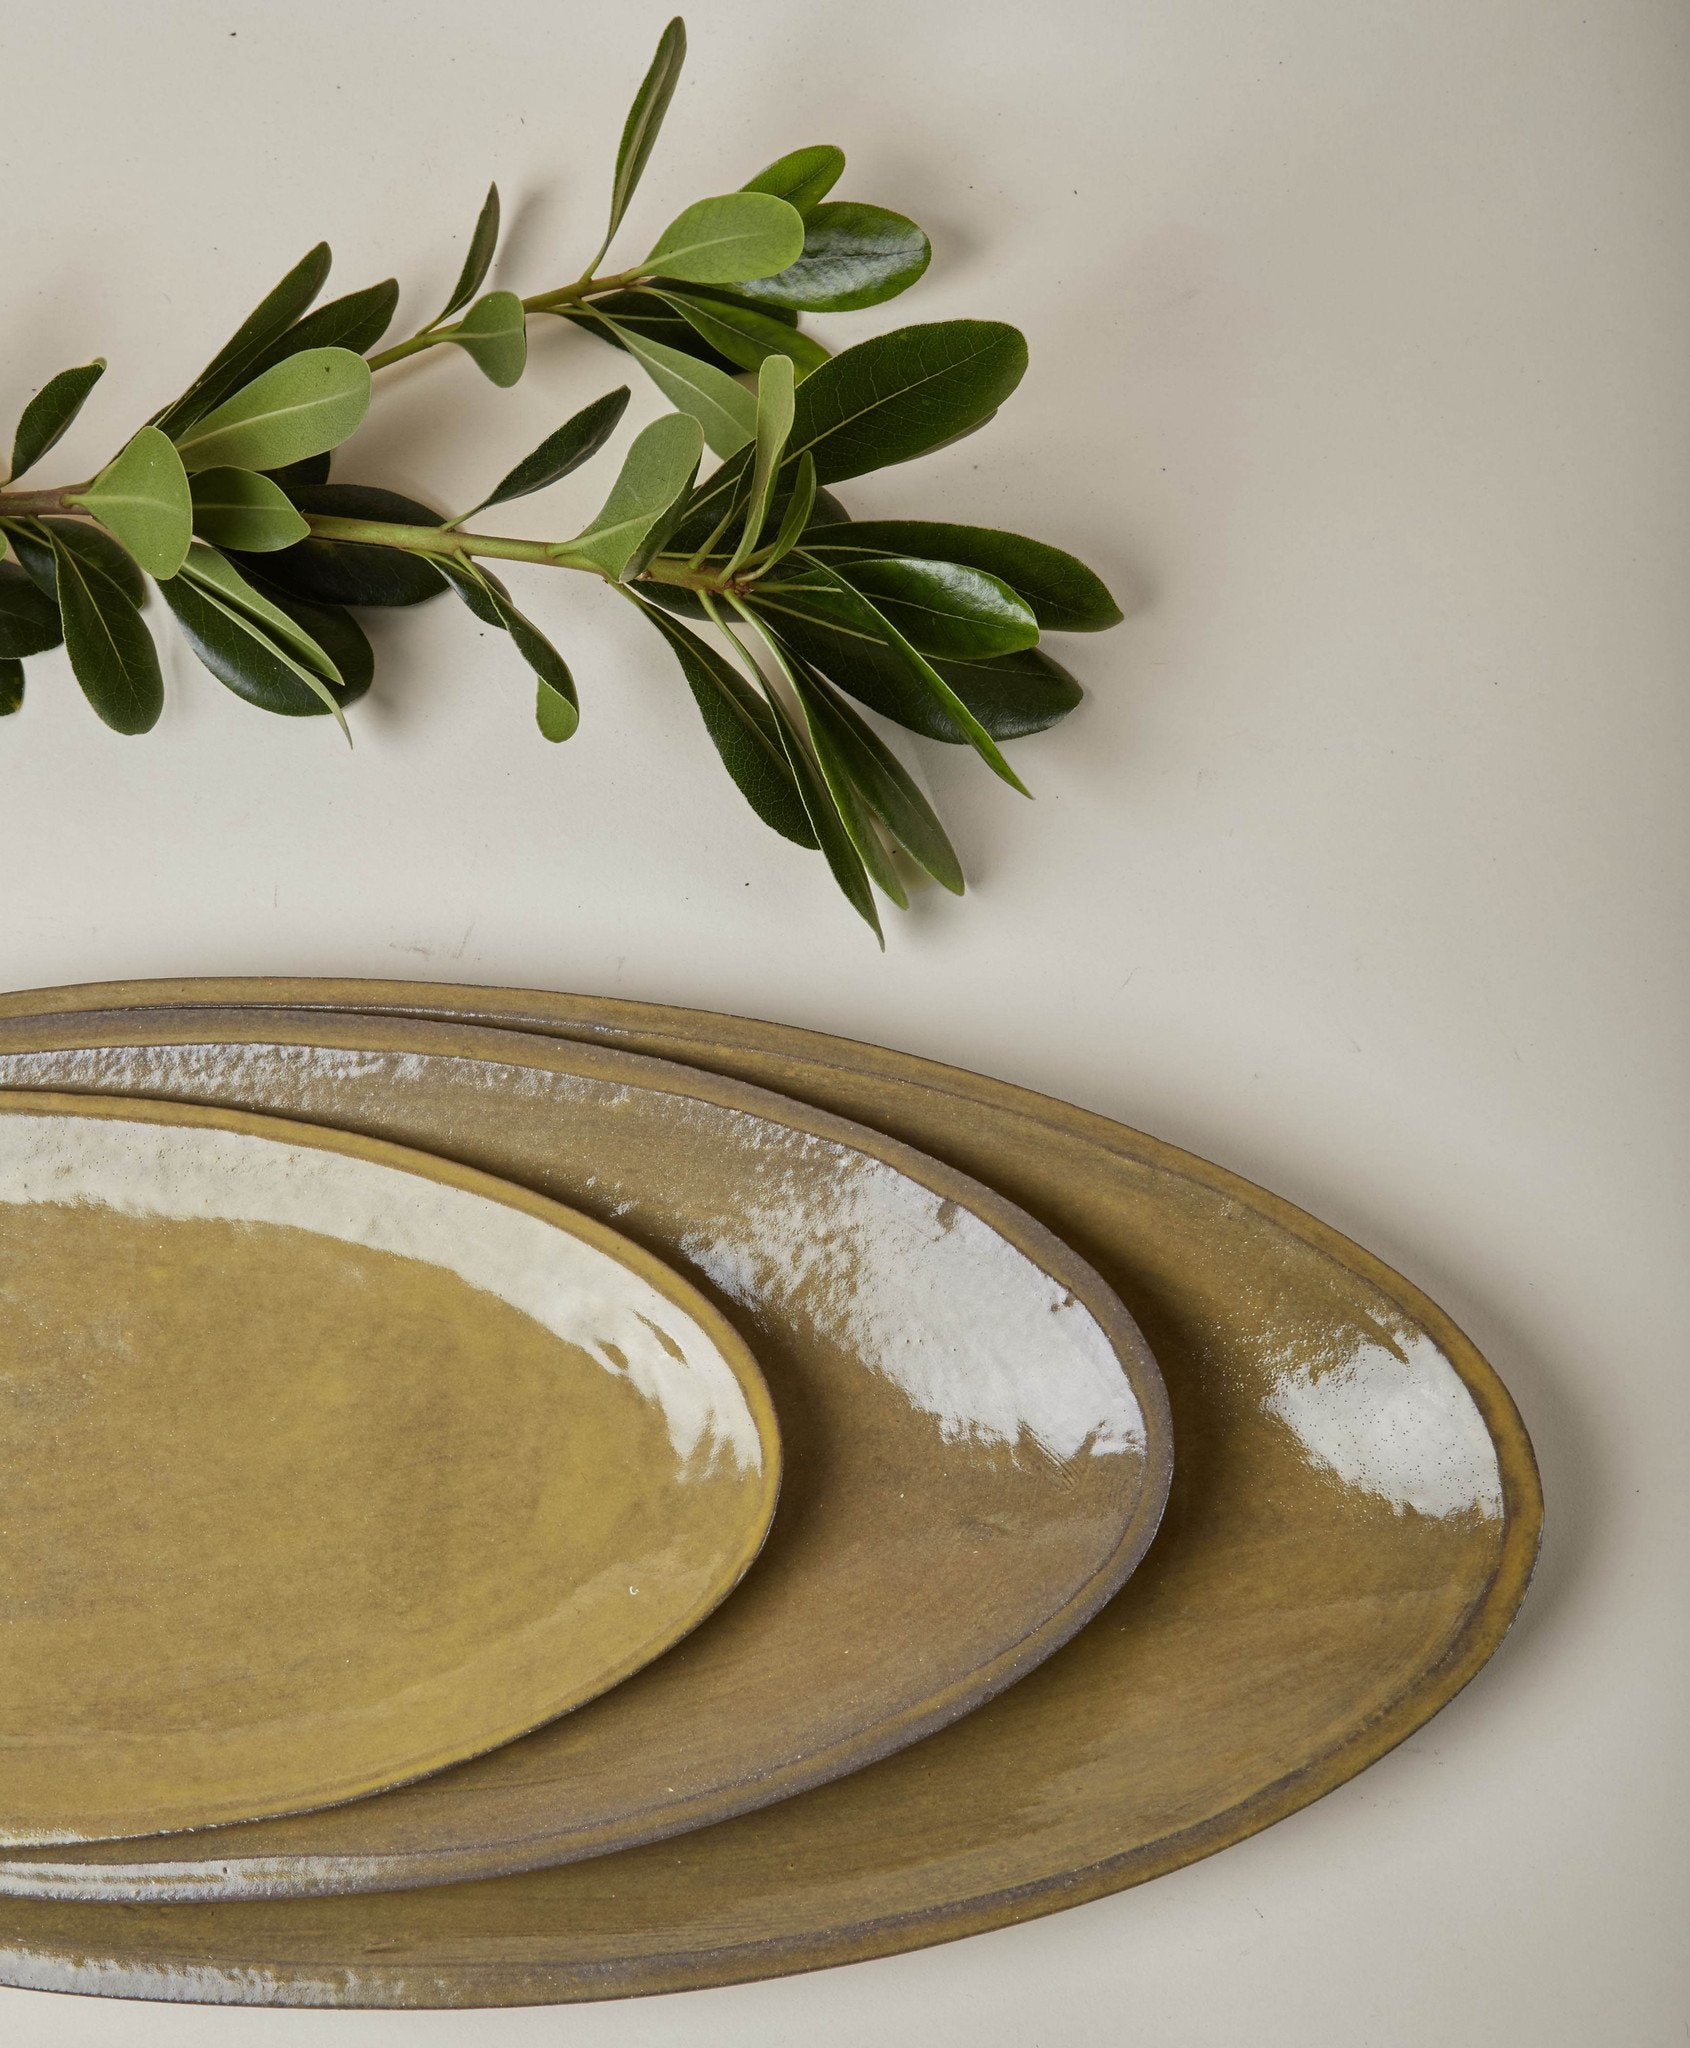   Set of Nested Oval Platters  